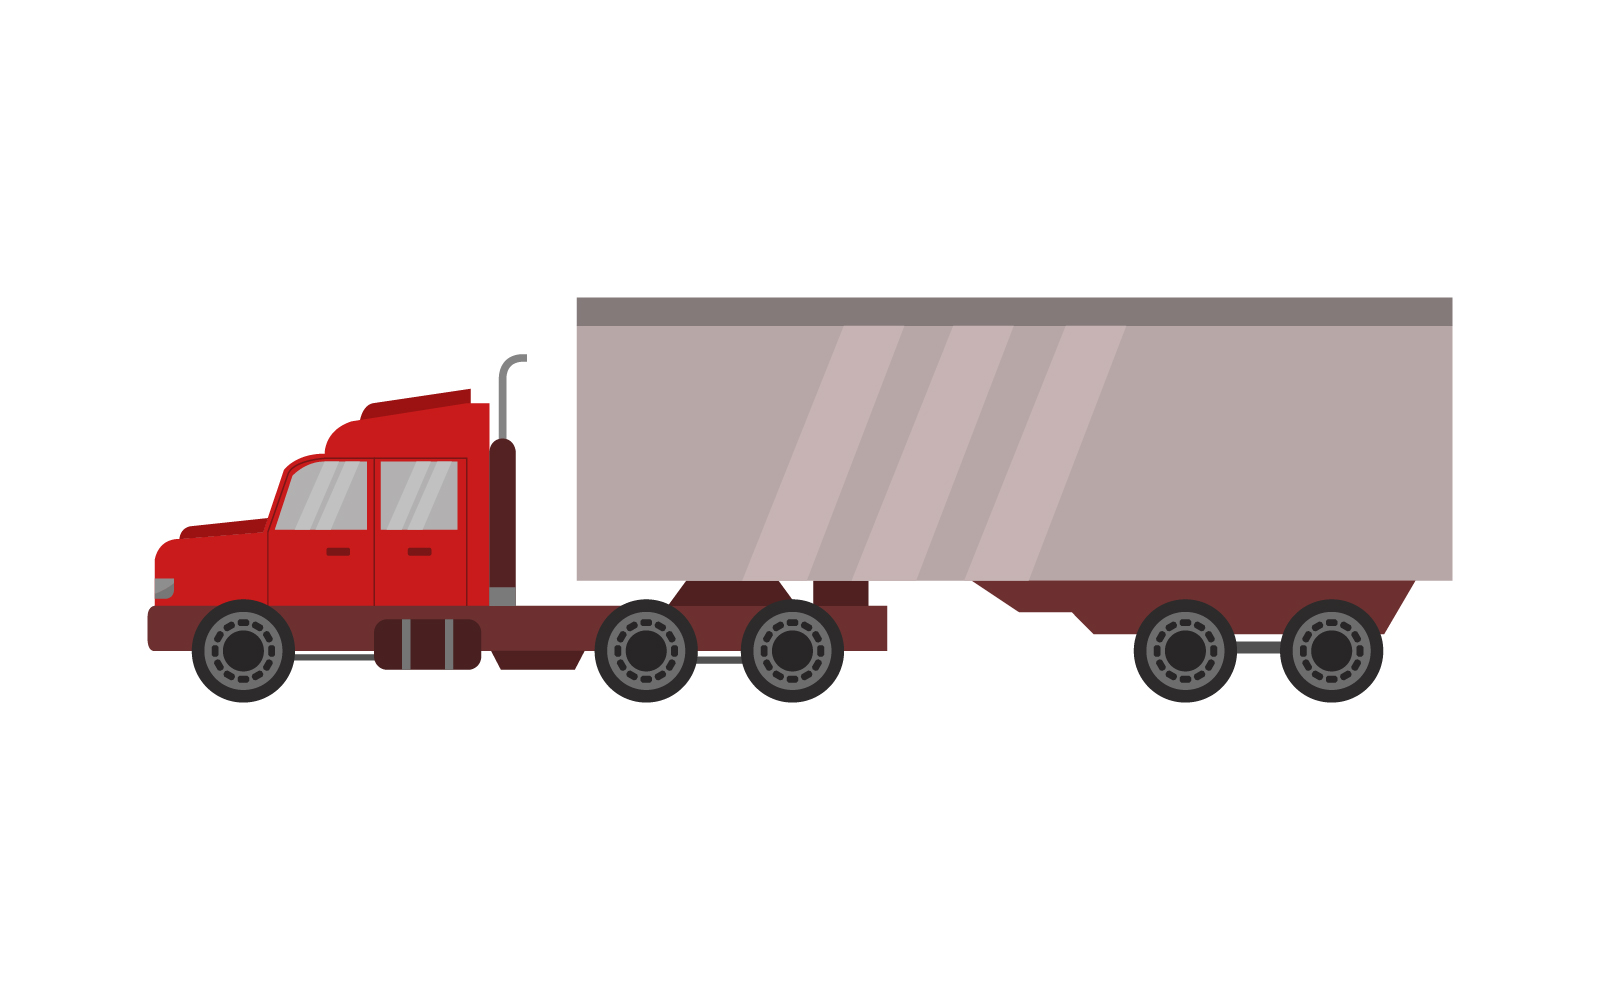 Truck illustrated in vector on a background